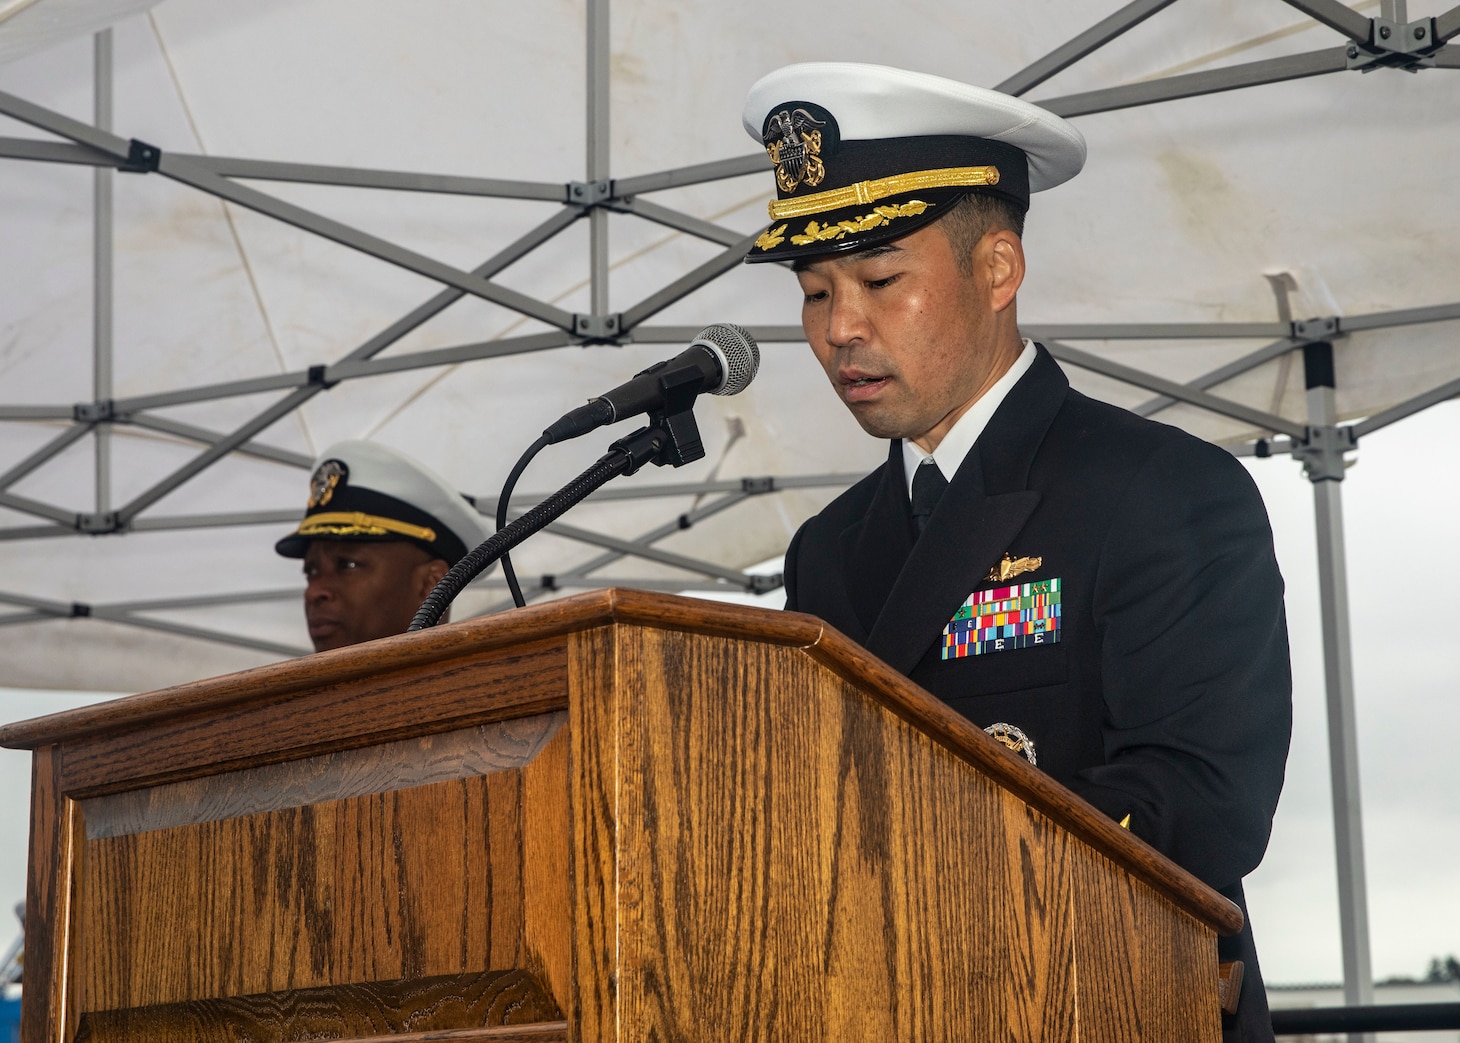 YOKOSUKA, Japan (Dec. 1, 2022) Cmdr. Kenji Igawa, incoming commanding officer of Arleigh Burke-class guided-missile destroyer USS Howard (DDG 83), reads his orders during a change of command ceremony aboard the ship, forward-deployed to Commander, Fleet Activities Yokosuka, Dec. 1. Howard is assigned to Commander, Task Force 71/Destroyer Squadron (DESRON) 15, the Navy’s largest forward-deployed DESRON and the U.S. 7th fleet’s principal surface force. (U.S. Navy photo by Mass Communication Specialist 2nd Class Samantha Oblander)